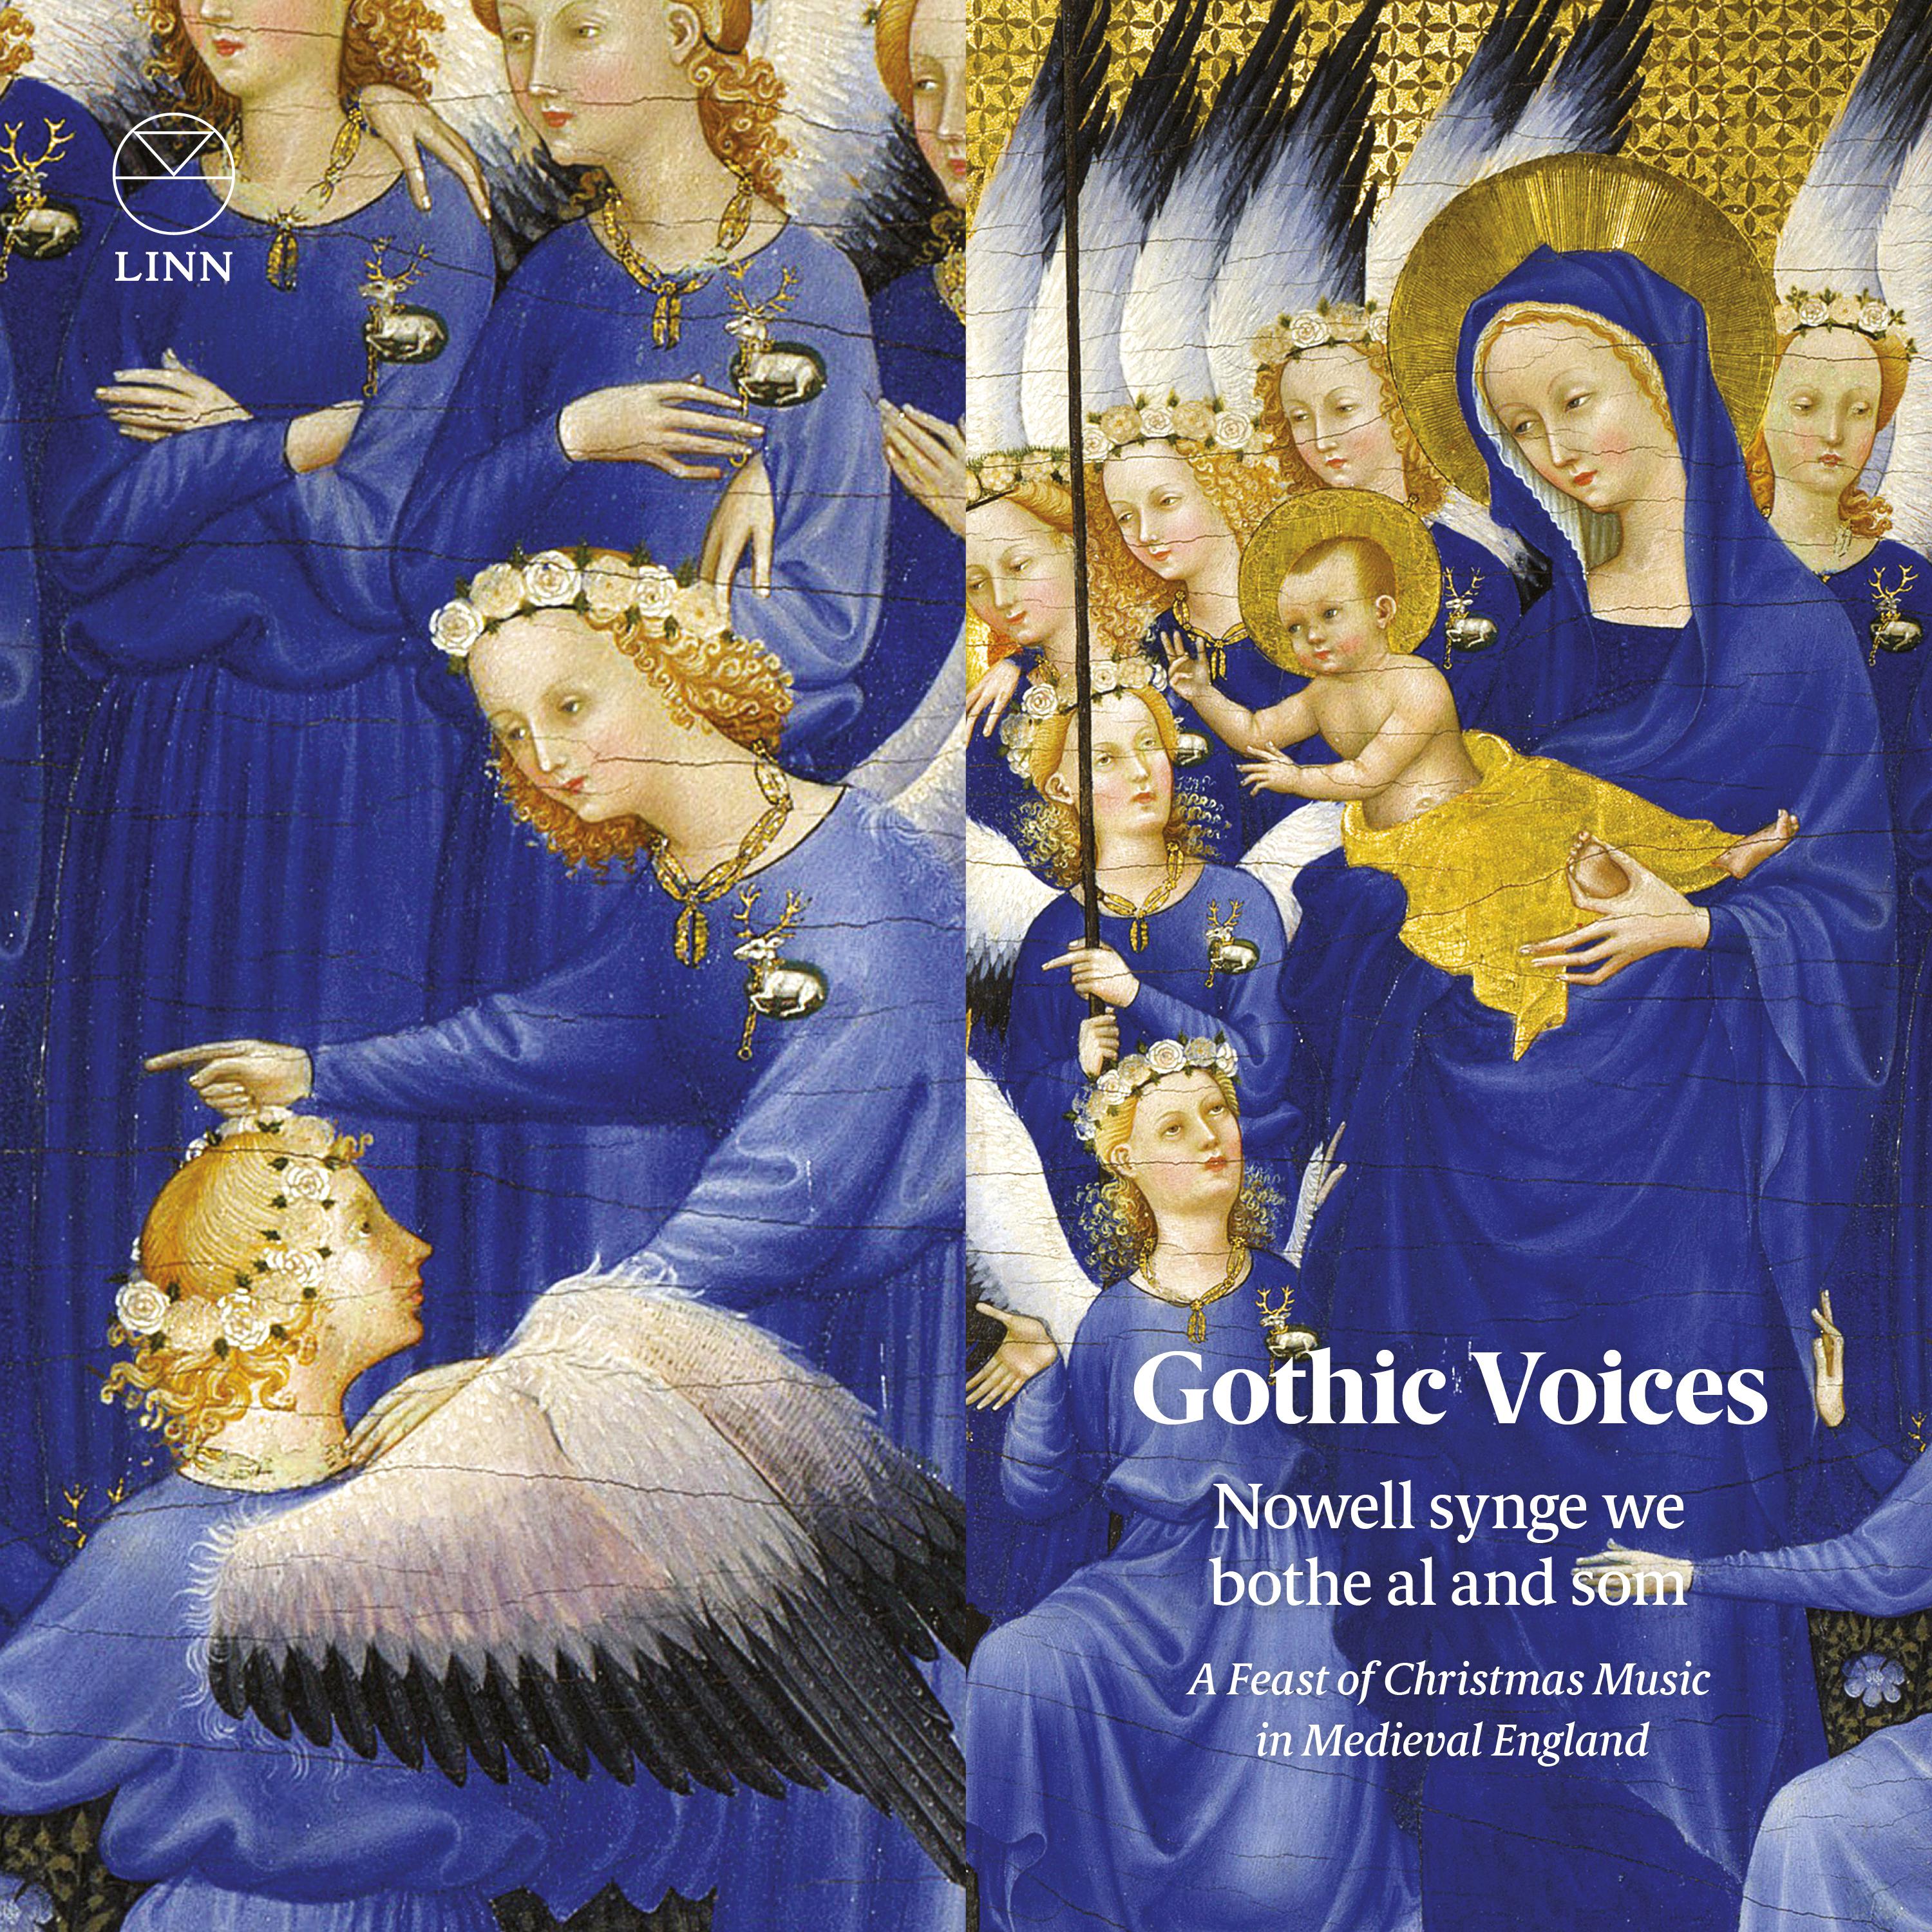 Gothic Voices - Nowell synge we bothe al and som